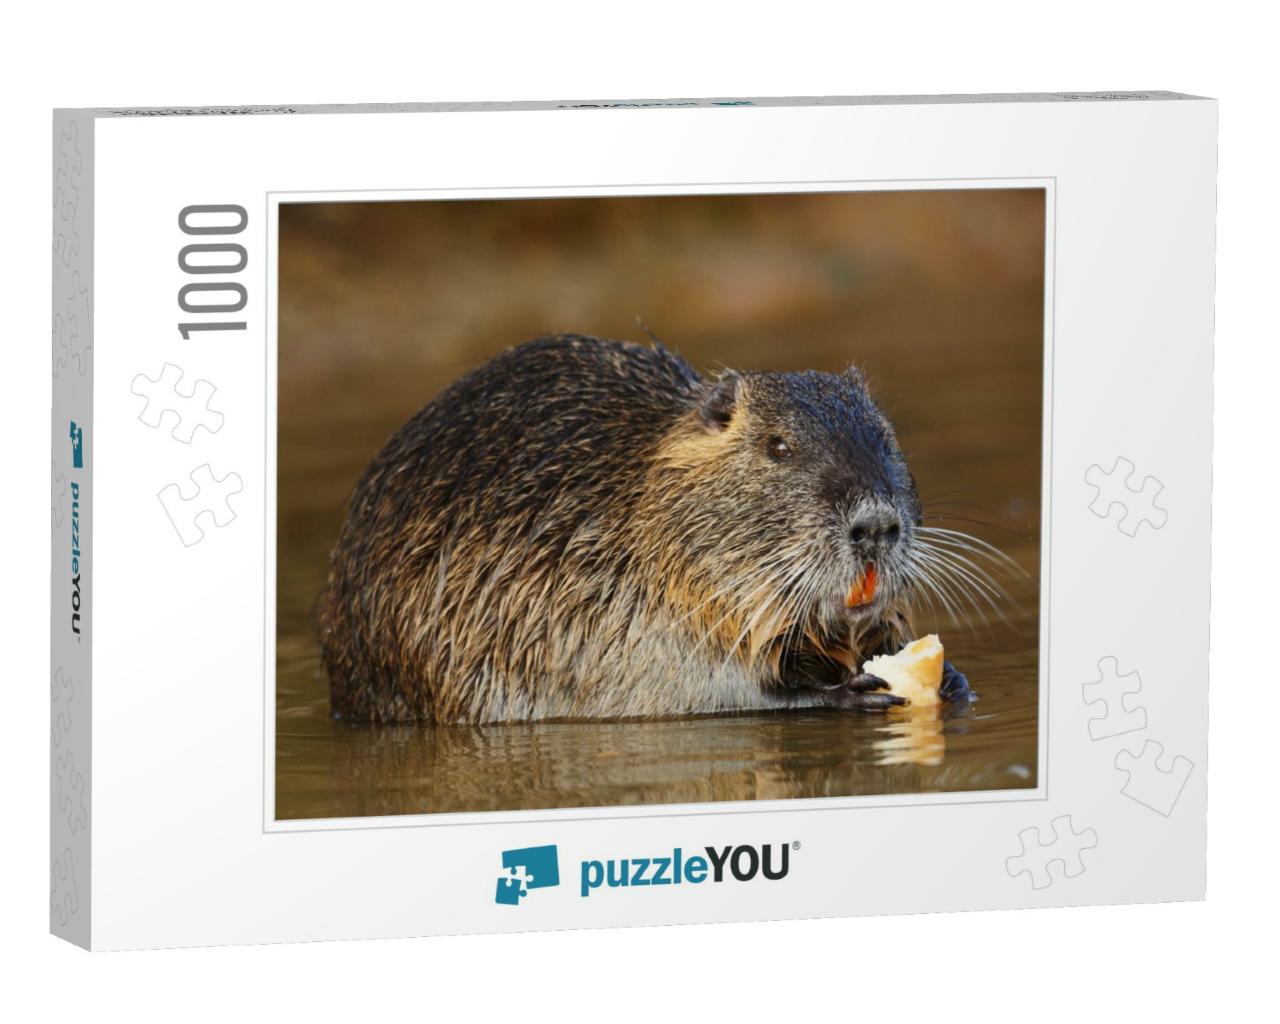 Coypu is Eating... Jigsaw Puzzle with 1000 pieces